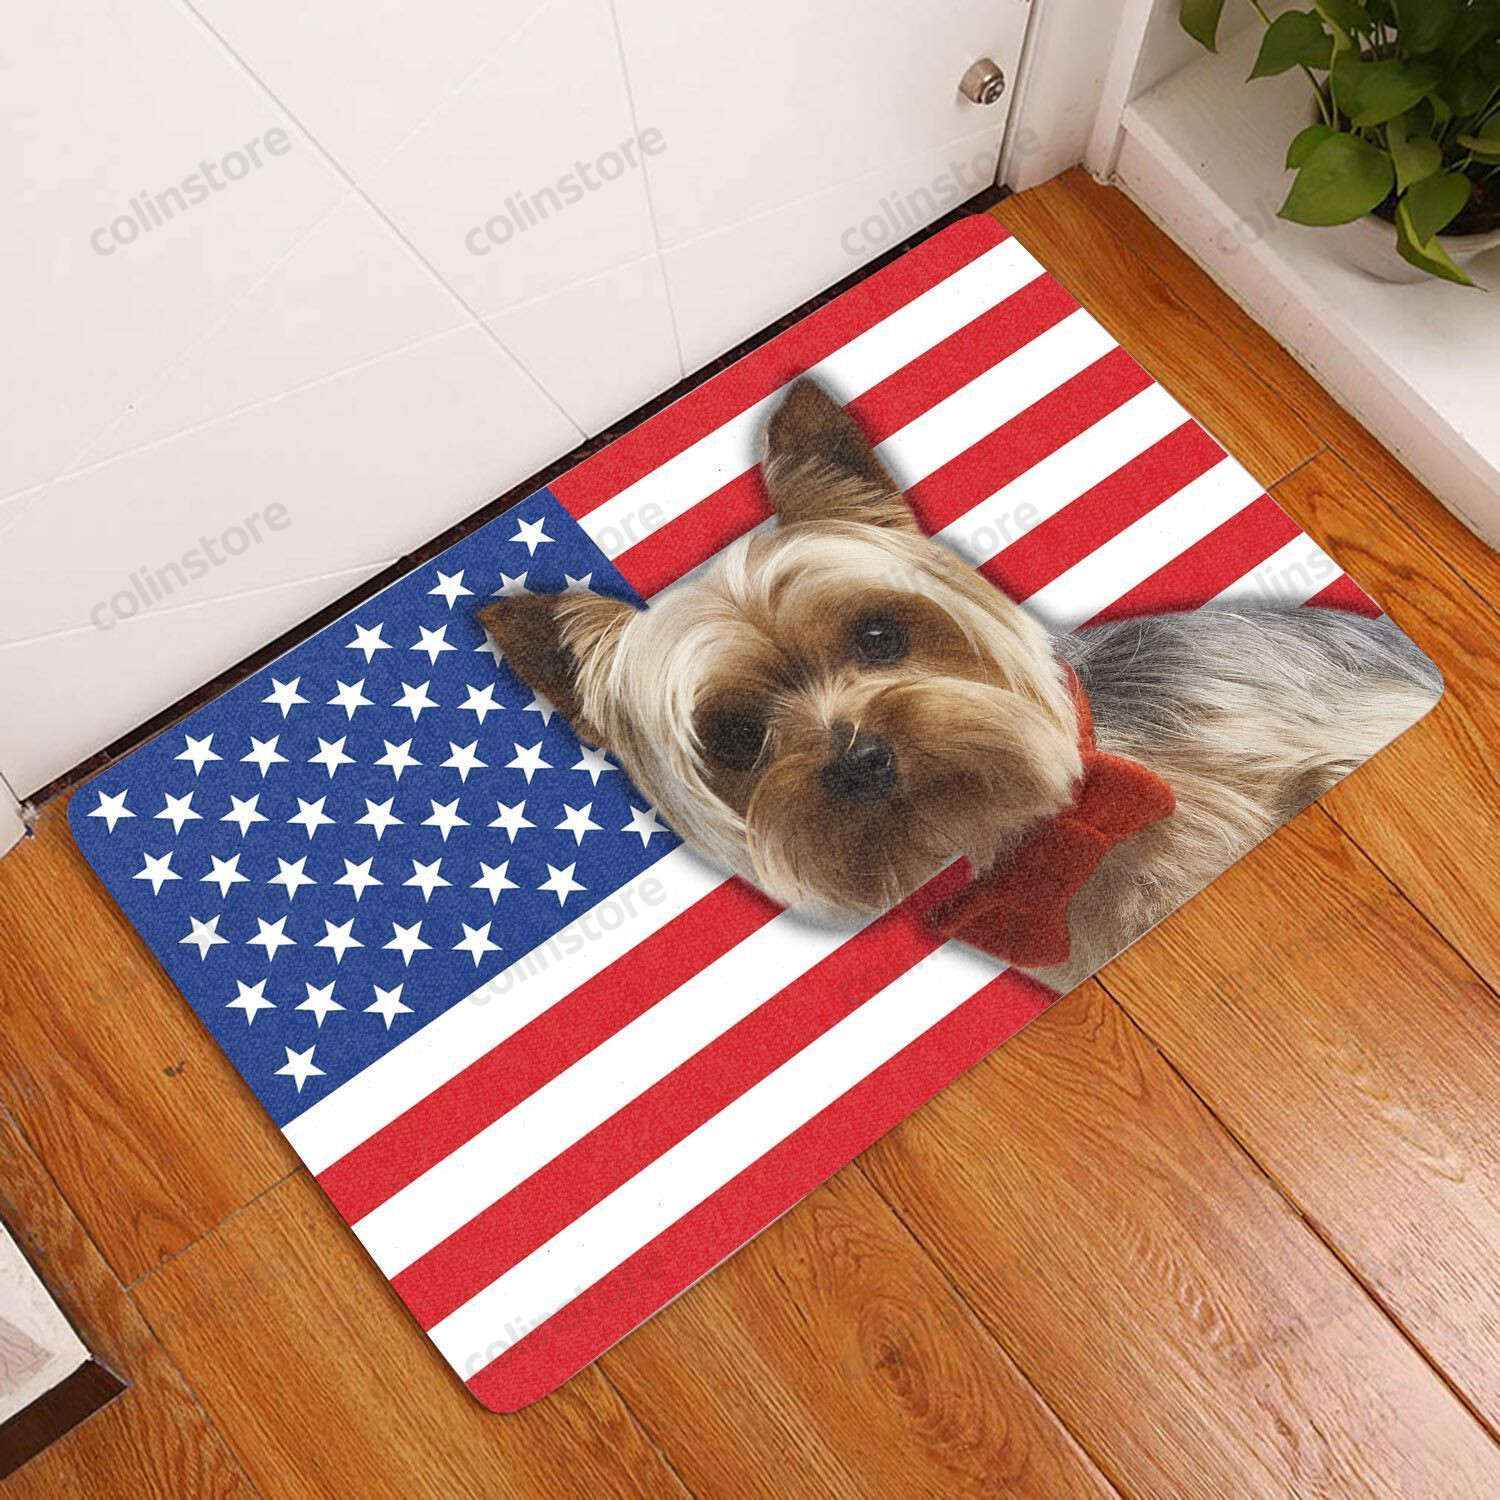 Amazing Yorkshire Terrier With American Flag - Dog Doormat Welcome Mat